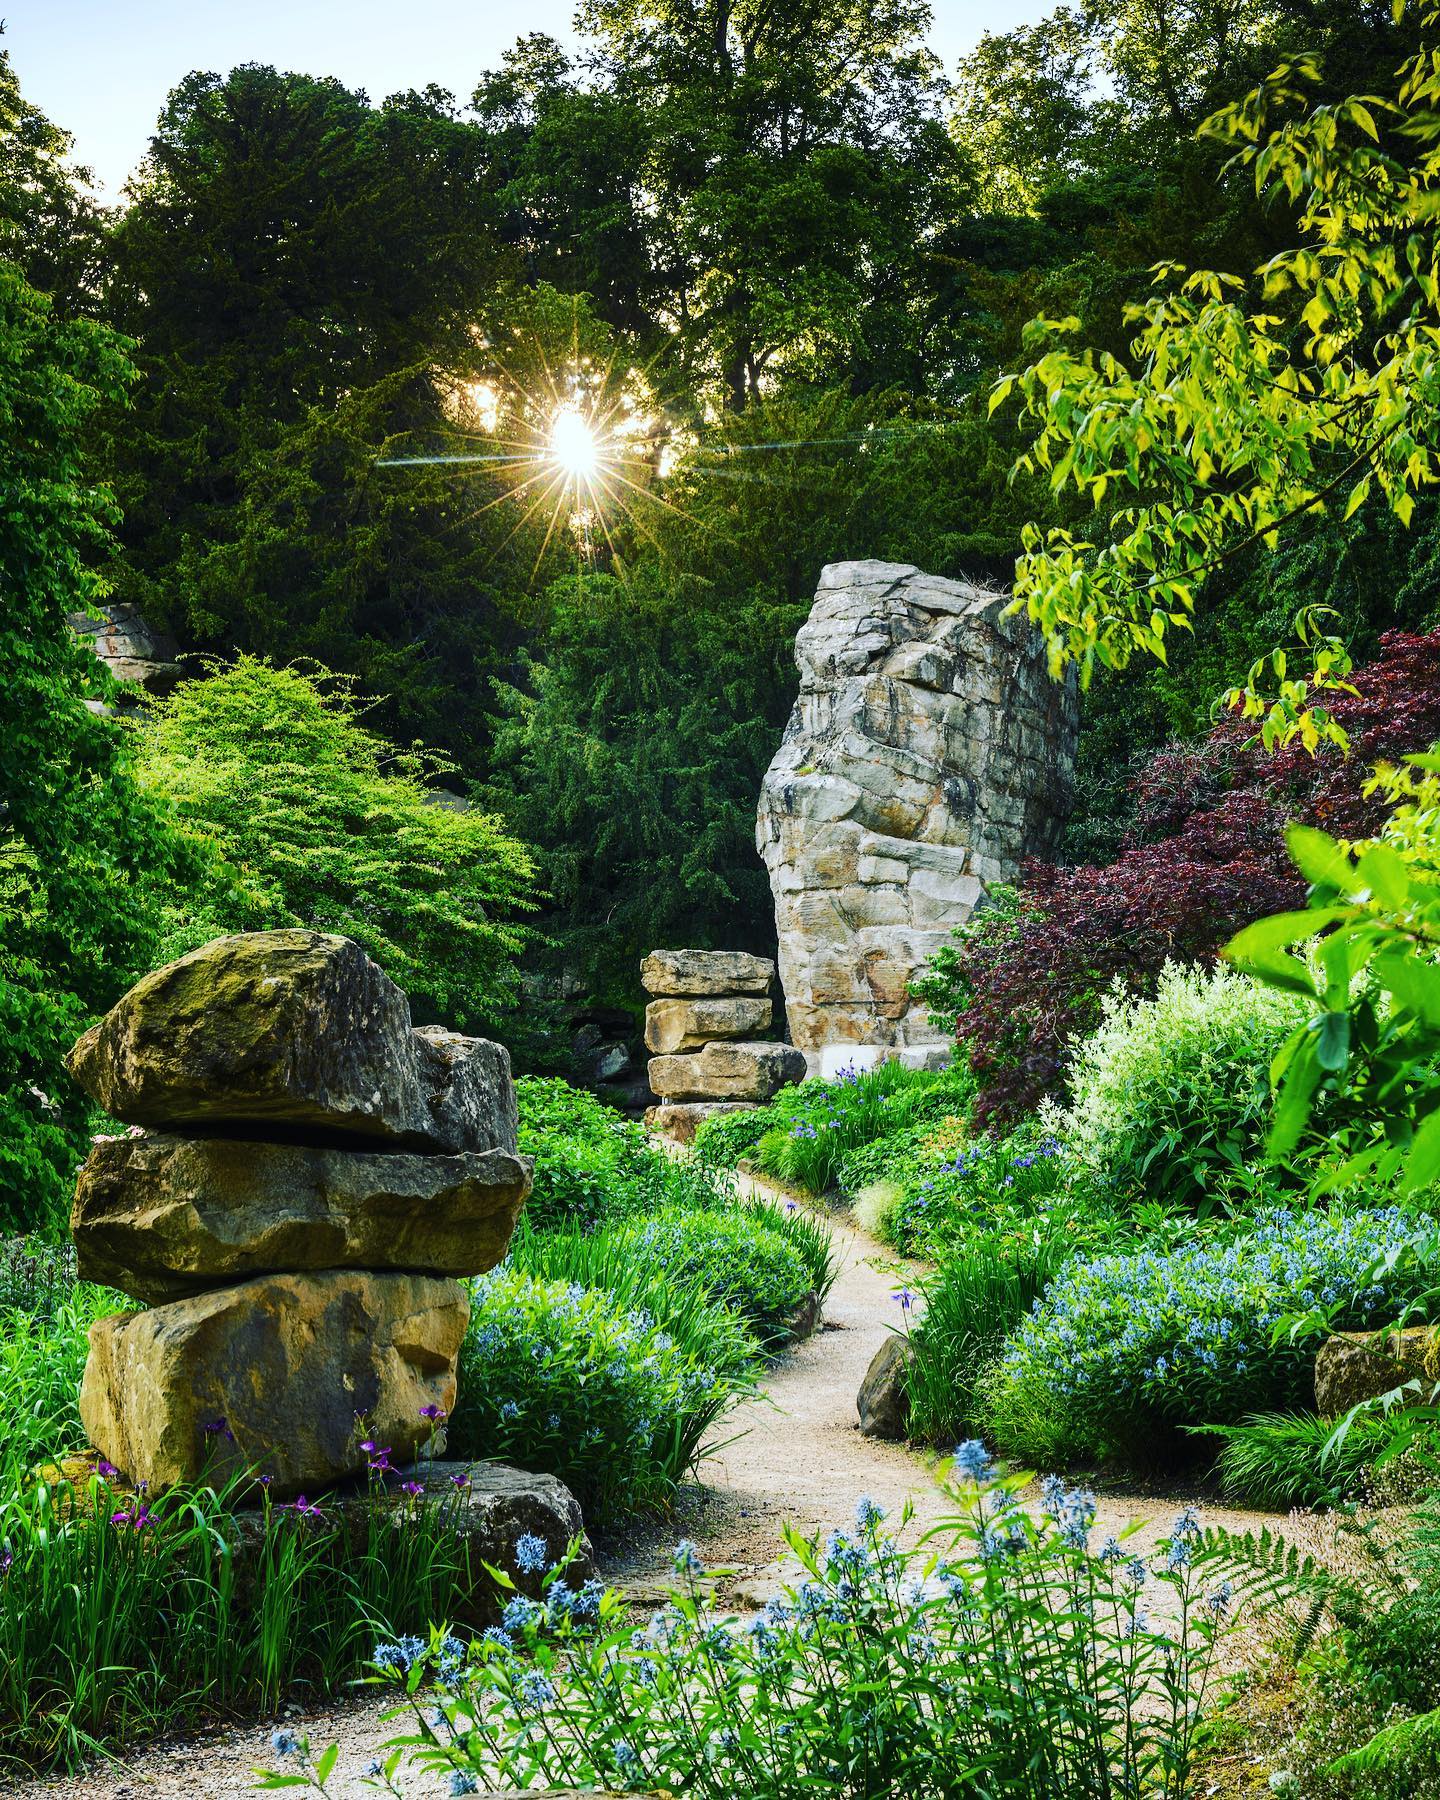 The Rock Garden at Chatsworth House. Published in @houseandgardenuk July’s issue. Redesigned by @tomstuartsmith ...#houseandgardenuk #houseandgarden #tomstuartsmith #chatsworth #chatsworthhouse #englishgardens #rockgarden #rockgardens #josephpaxton #chatsworthgardens #gardenphotography #gardenphotographer #jasoningramphotography #jasoningramphotographer